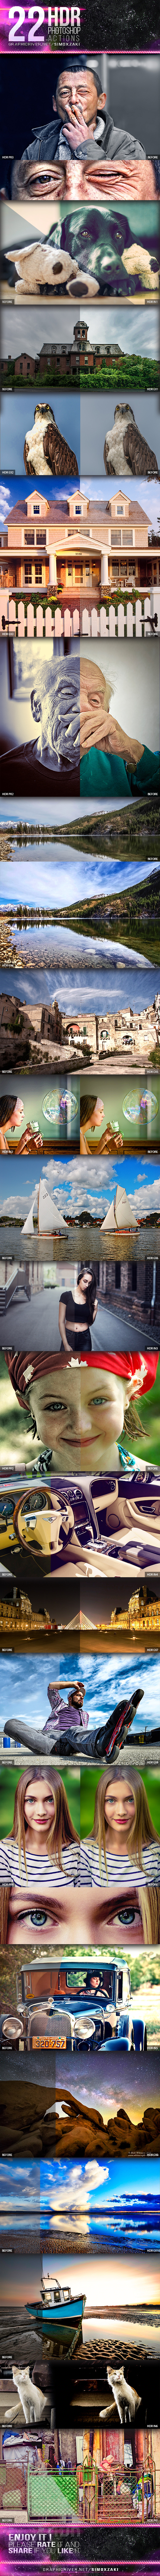 22 HDR Photoshop Actions V2